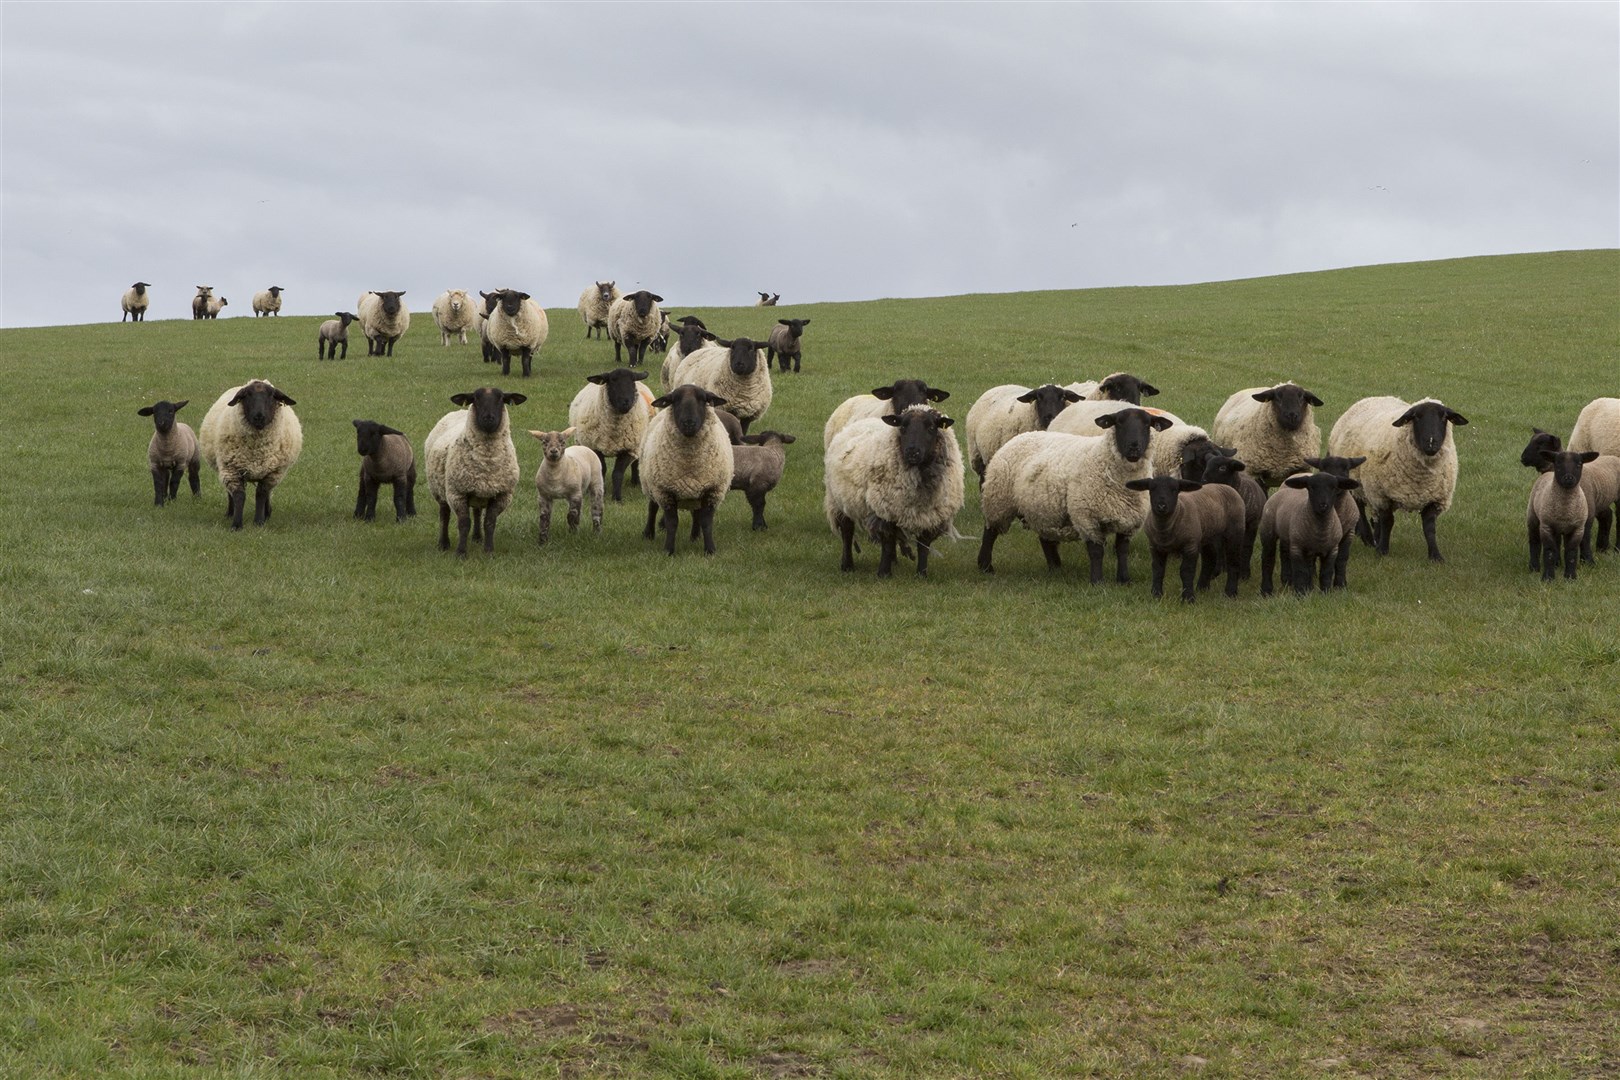 The number of dog attacks on sheep has risen in recent years.